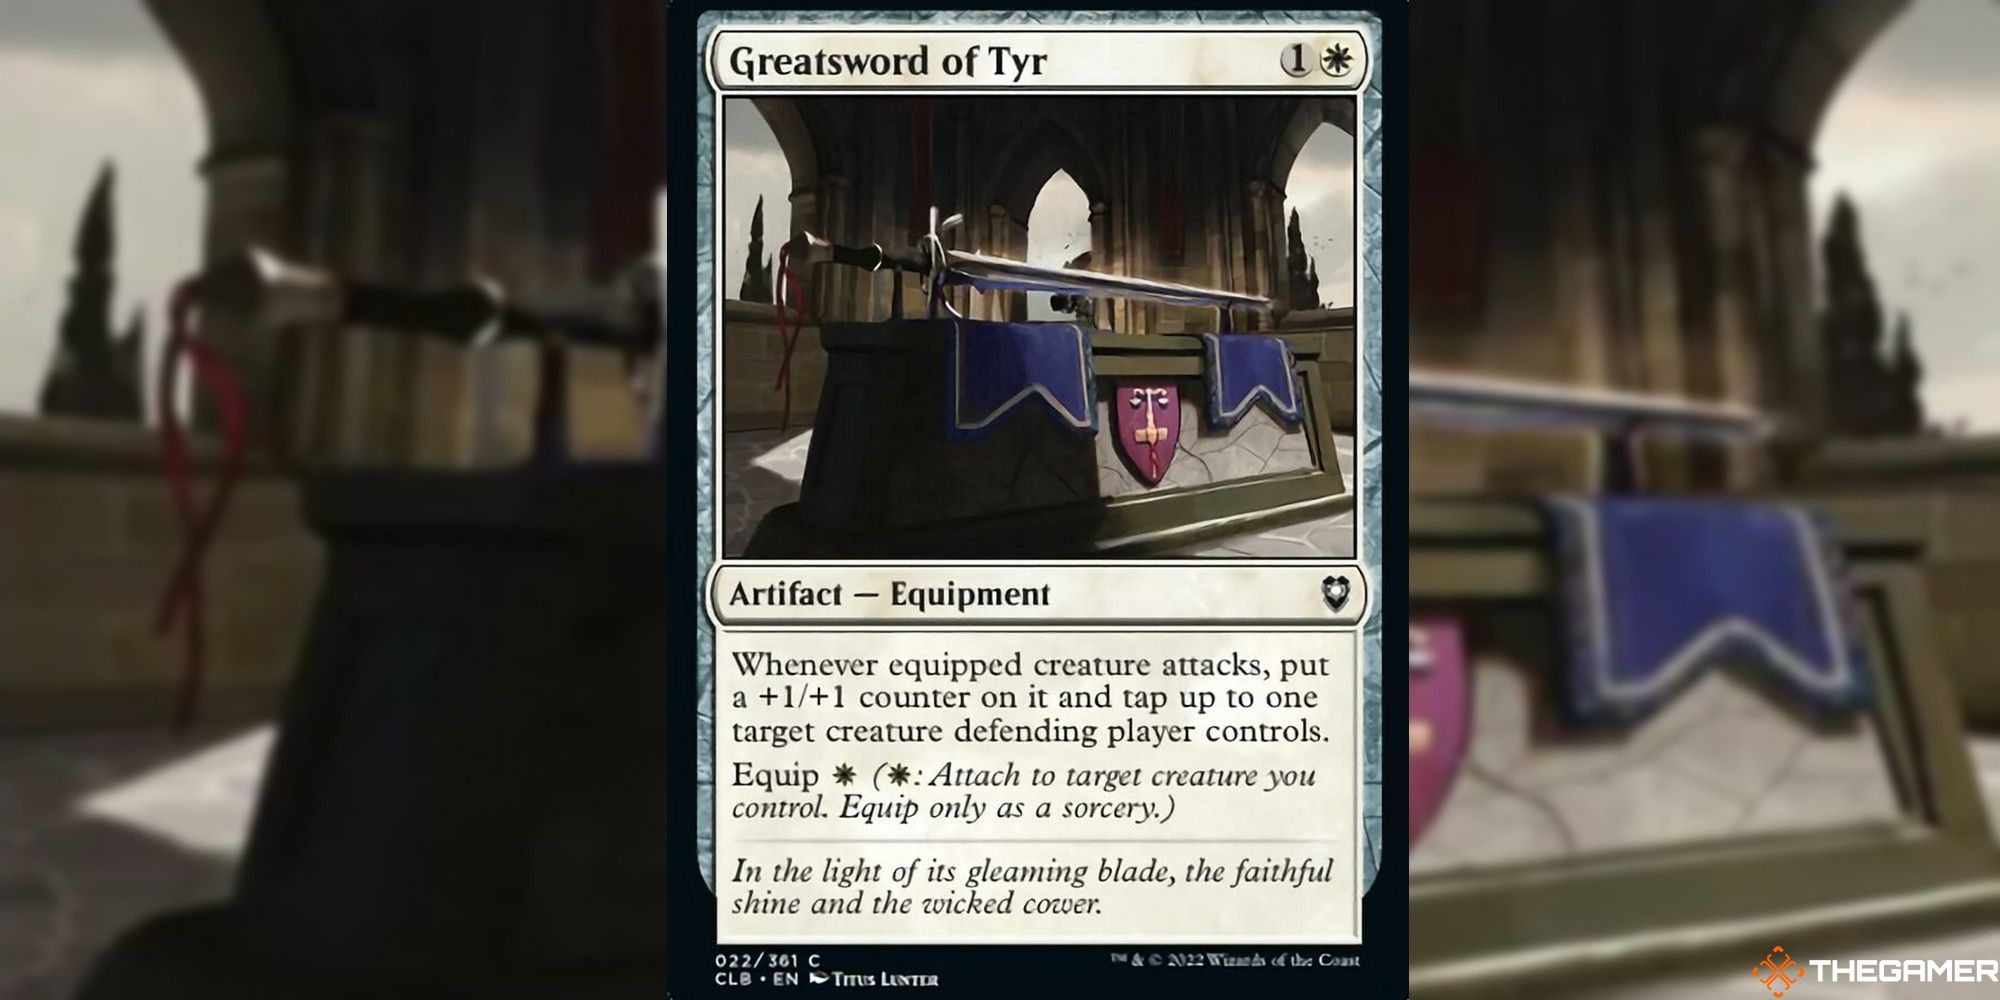 mtg greatsword of tyr card art and text